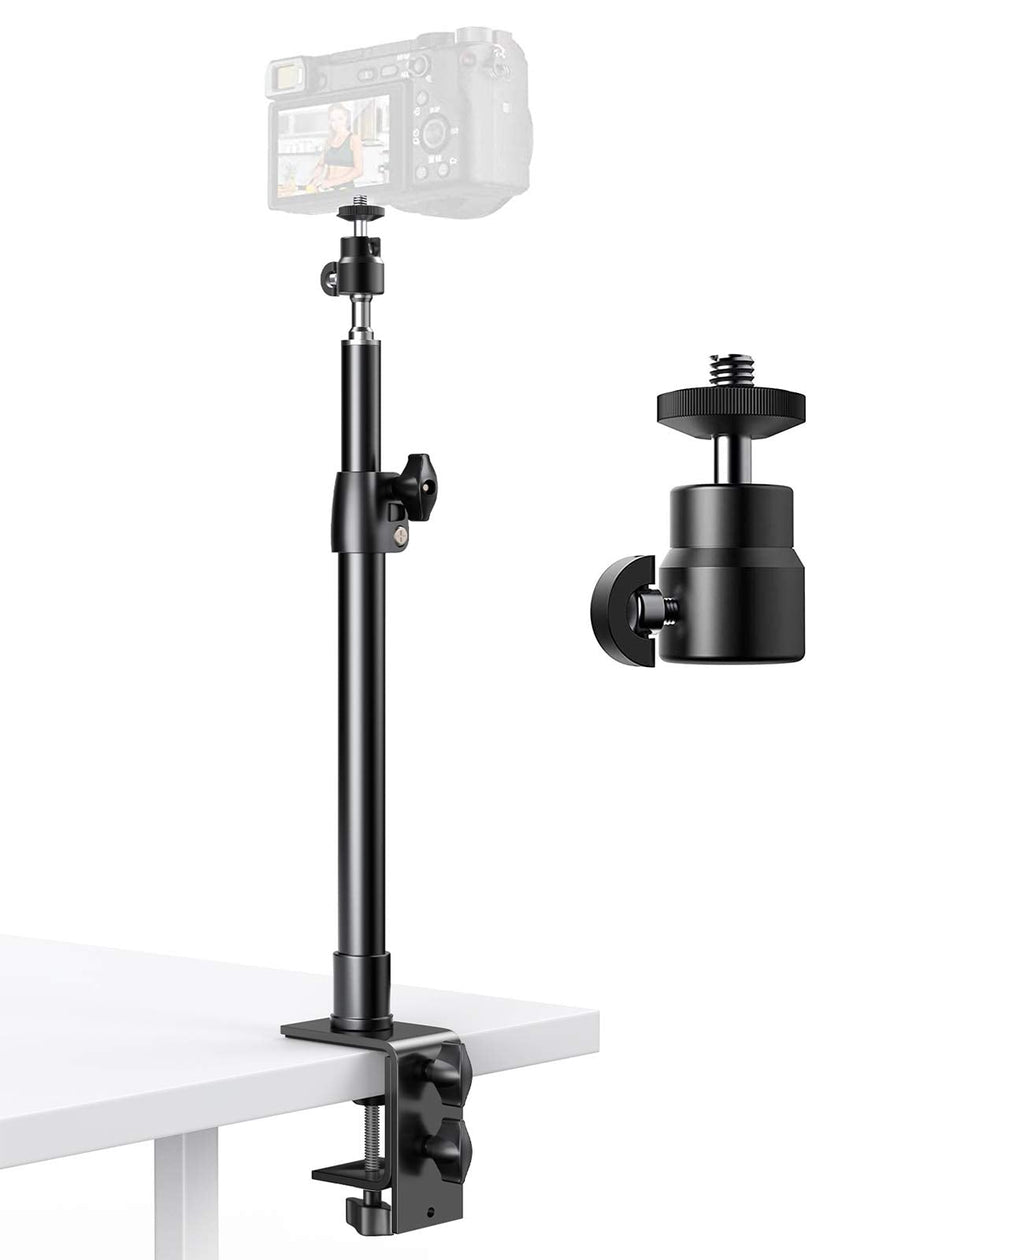 Pixel Desk Camera Mount Stand,12.9-22 inch Table C Clamp Mount Stand, Adjustable Aluminum Light Stand with 360°Ball Head,1/4" Screw Tip for DSLR Camera/Ring Light/Video Monitor/webcam light 1 Pack